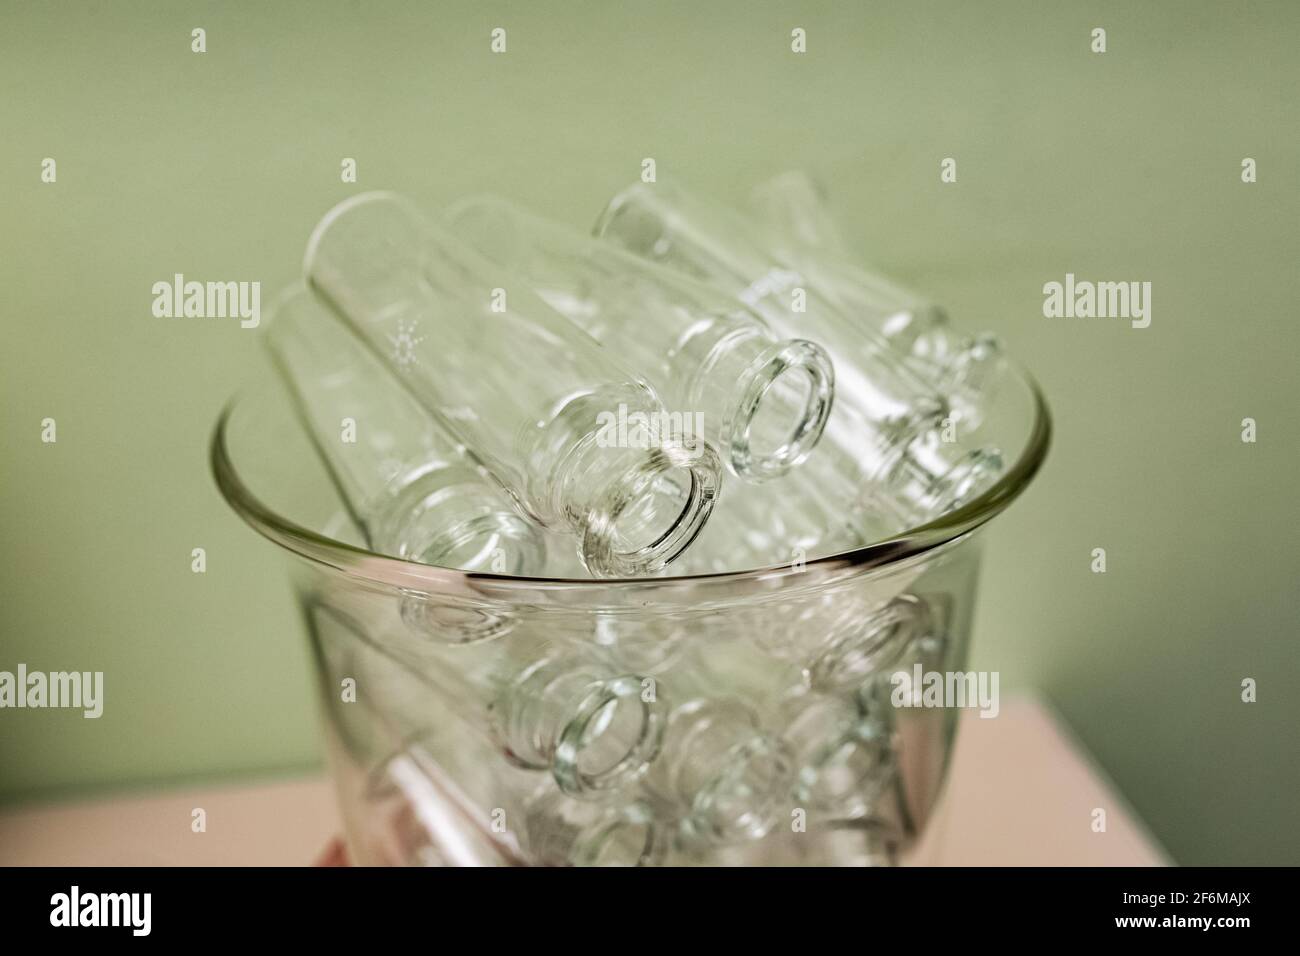 The Clean lab utensils Stock Photo - Alamy